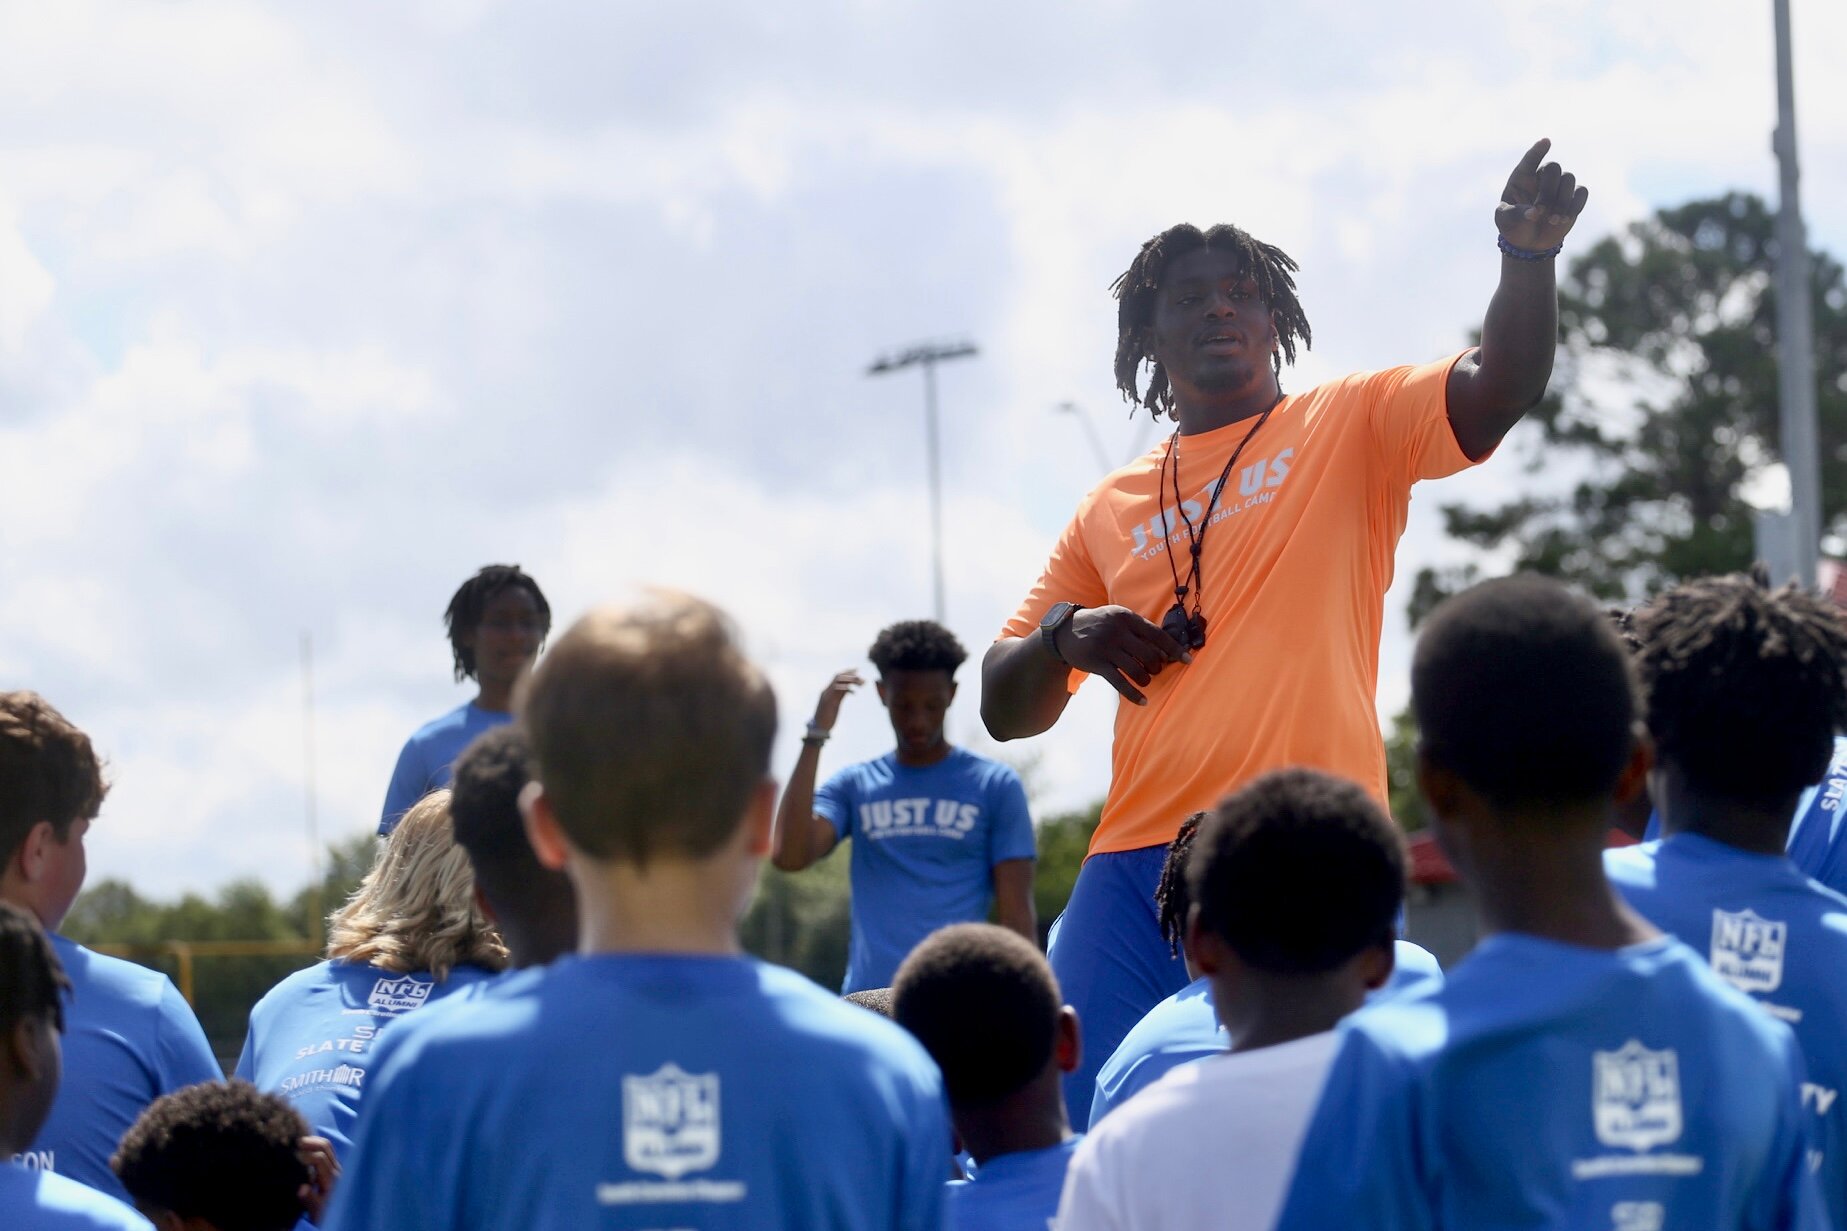 Former Sumter High star Justus Boone led his third-annual Just-Us youth football camp on Saturday.